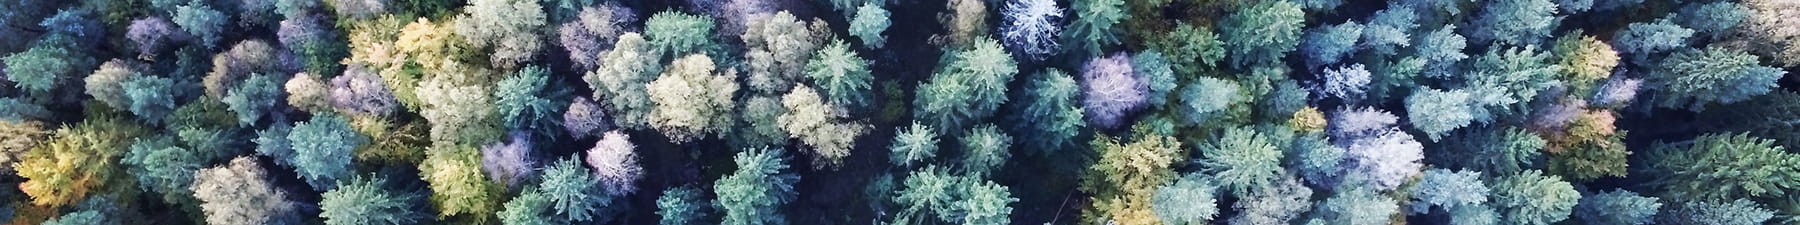 Arial view of a forest